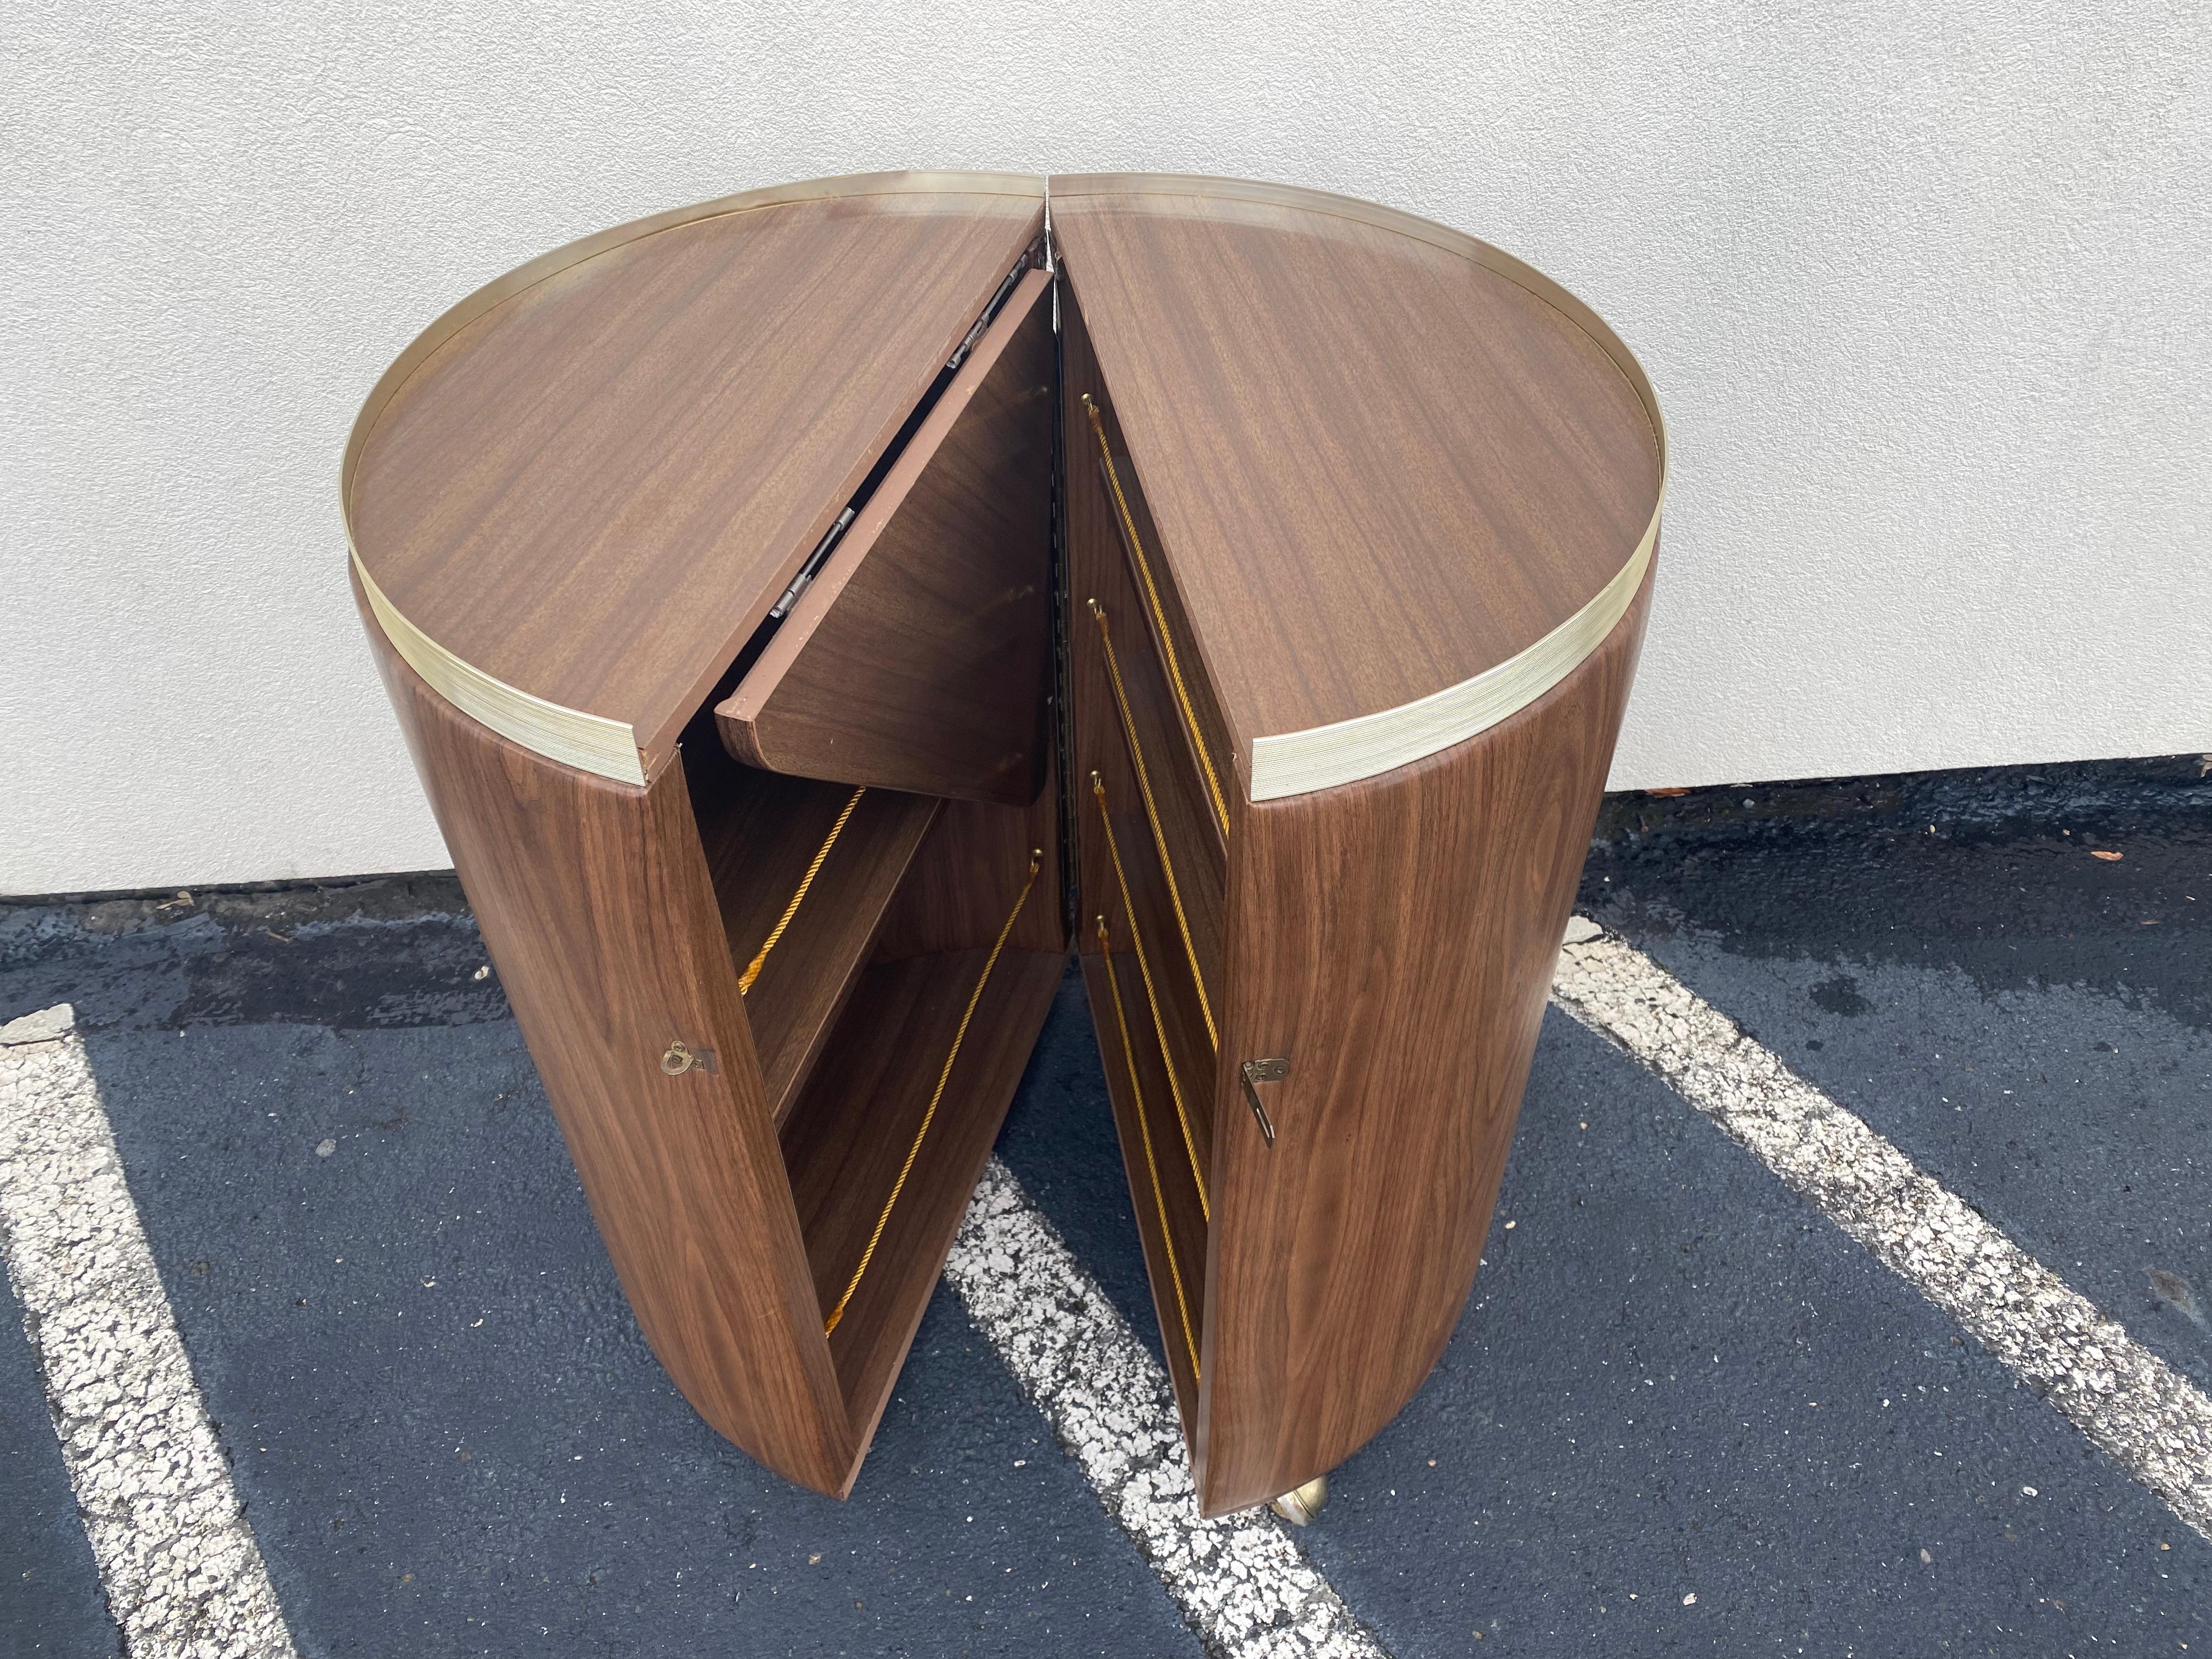 Mid-Century Modern circular rolling bar- Expandable. Bar cabinet has a circular shape in closed position and expands into a serving bar cabinet with connecting fold-out surface. Bar has vinyl fabric with wood-look pattern on its outer and interior